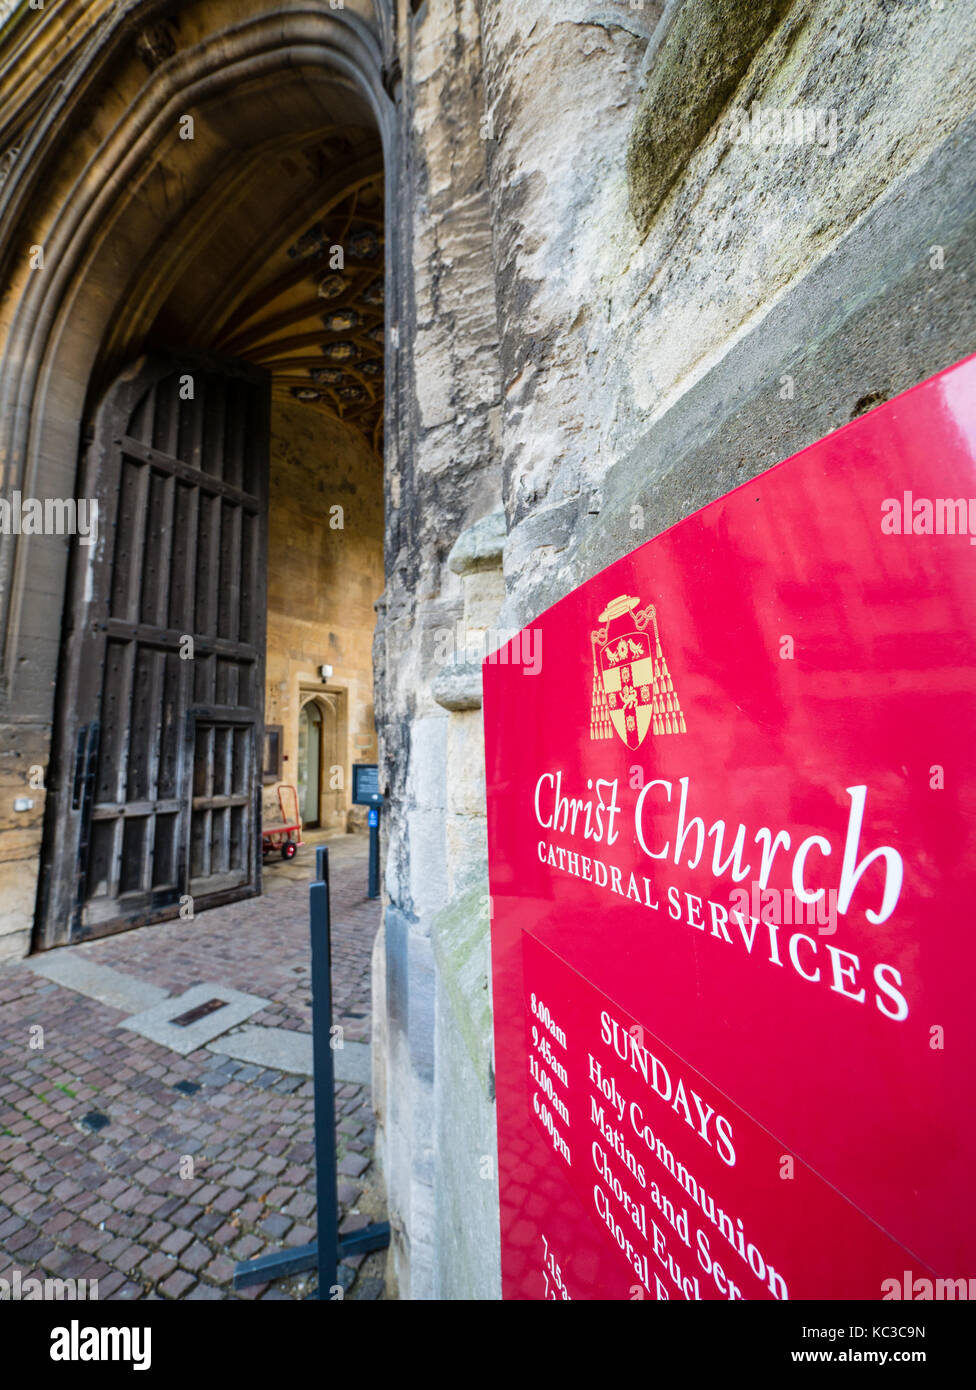 Entrance to Tom Tower, Christ Church College, Oxford University, Oxford, Oxfordshire Stock Photo